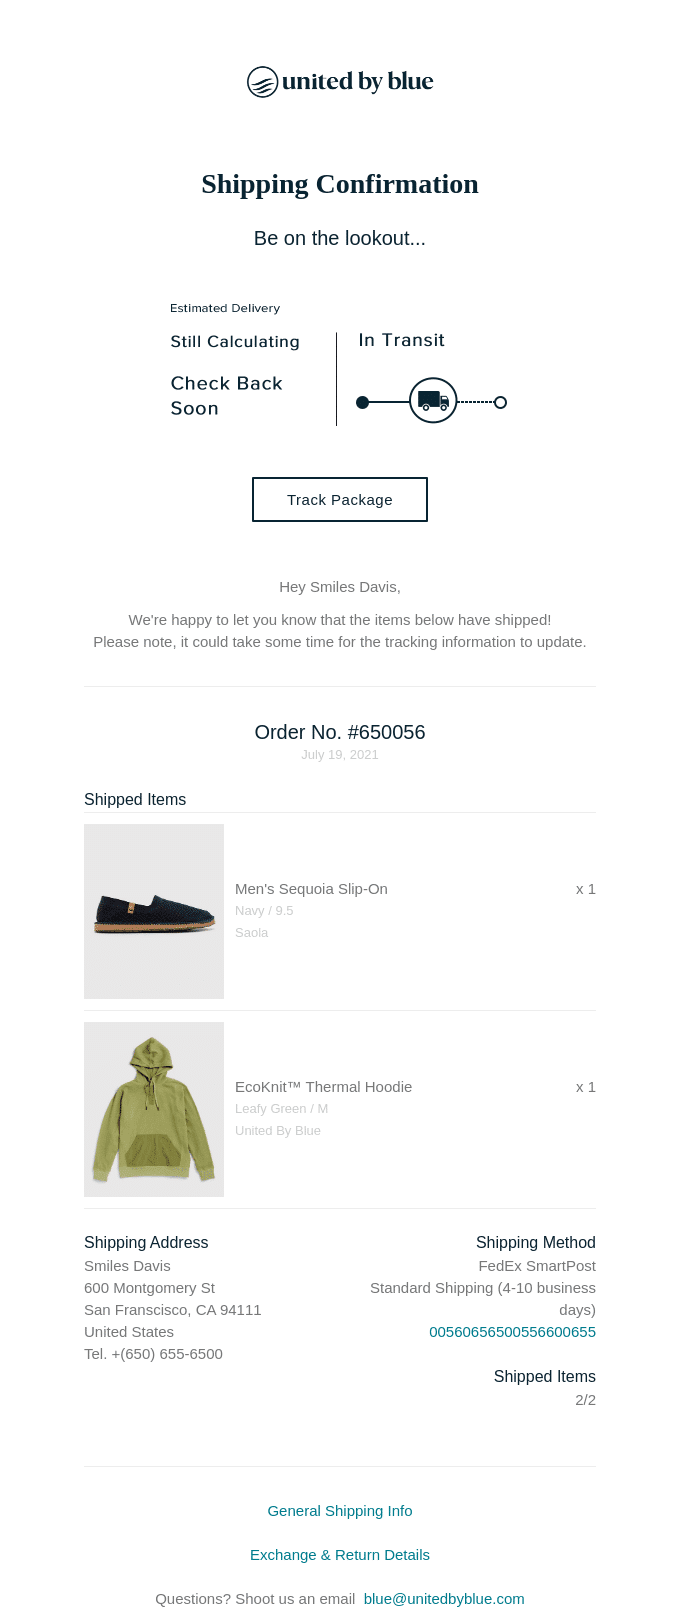 Post purchase emial - Shipping confirmation